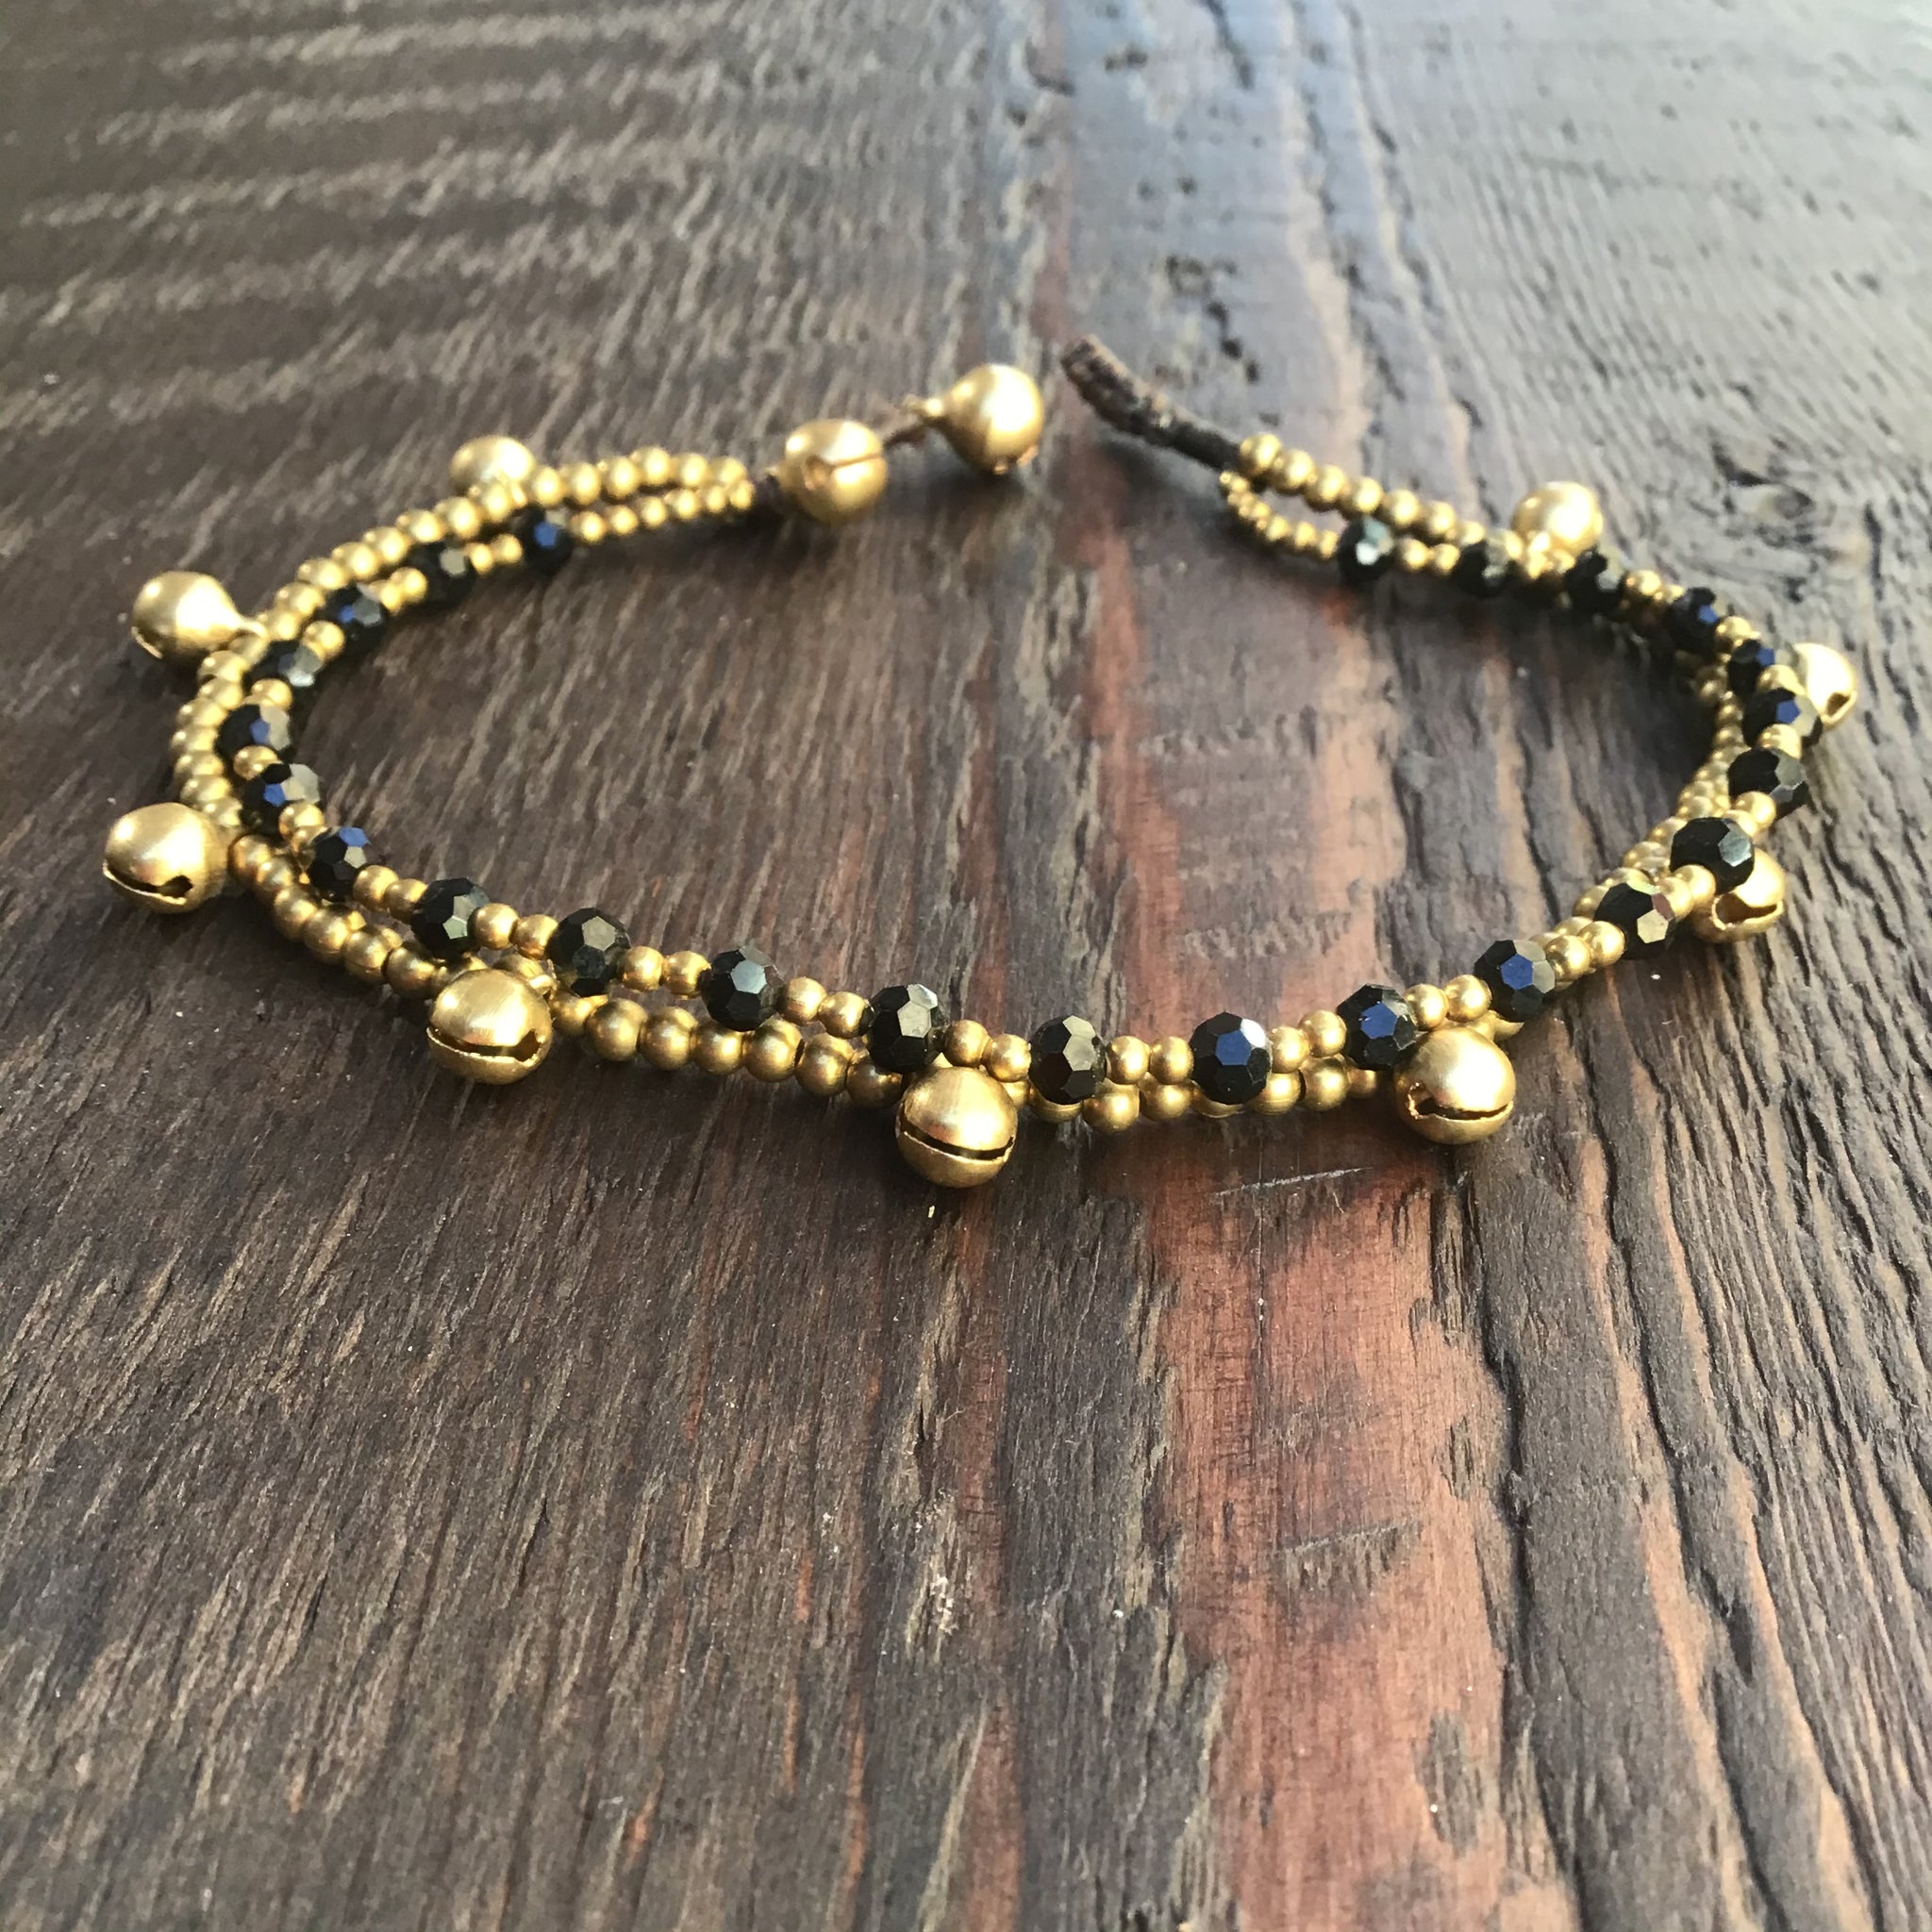 'Bead Love' 2 Strand Anklet with Faceted Beads (Black)